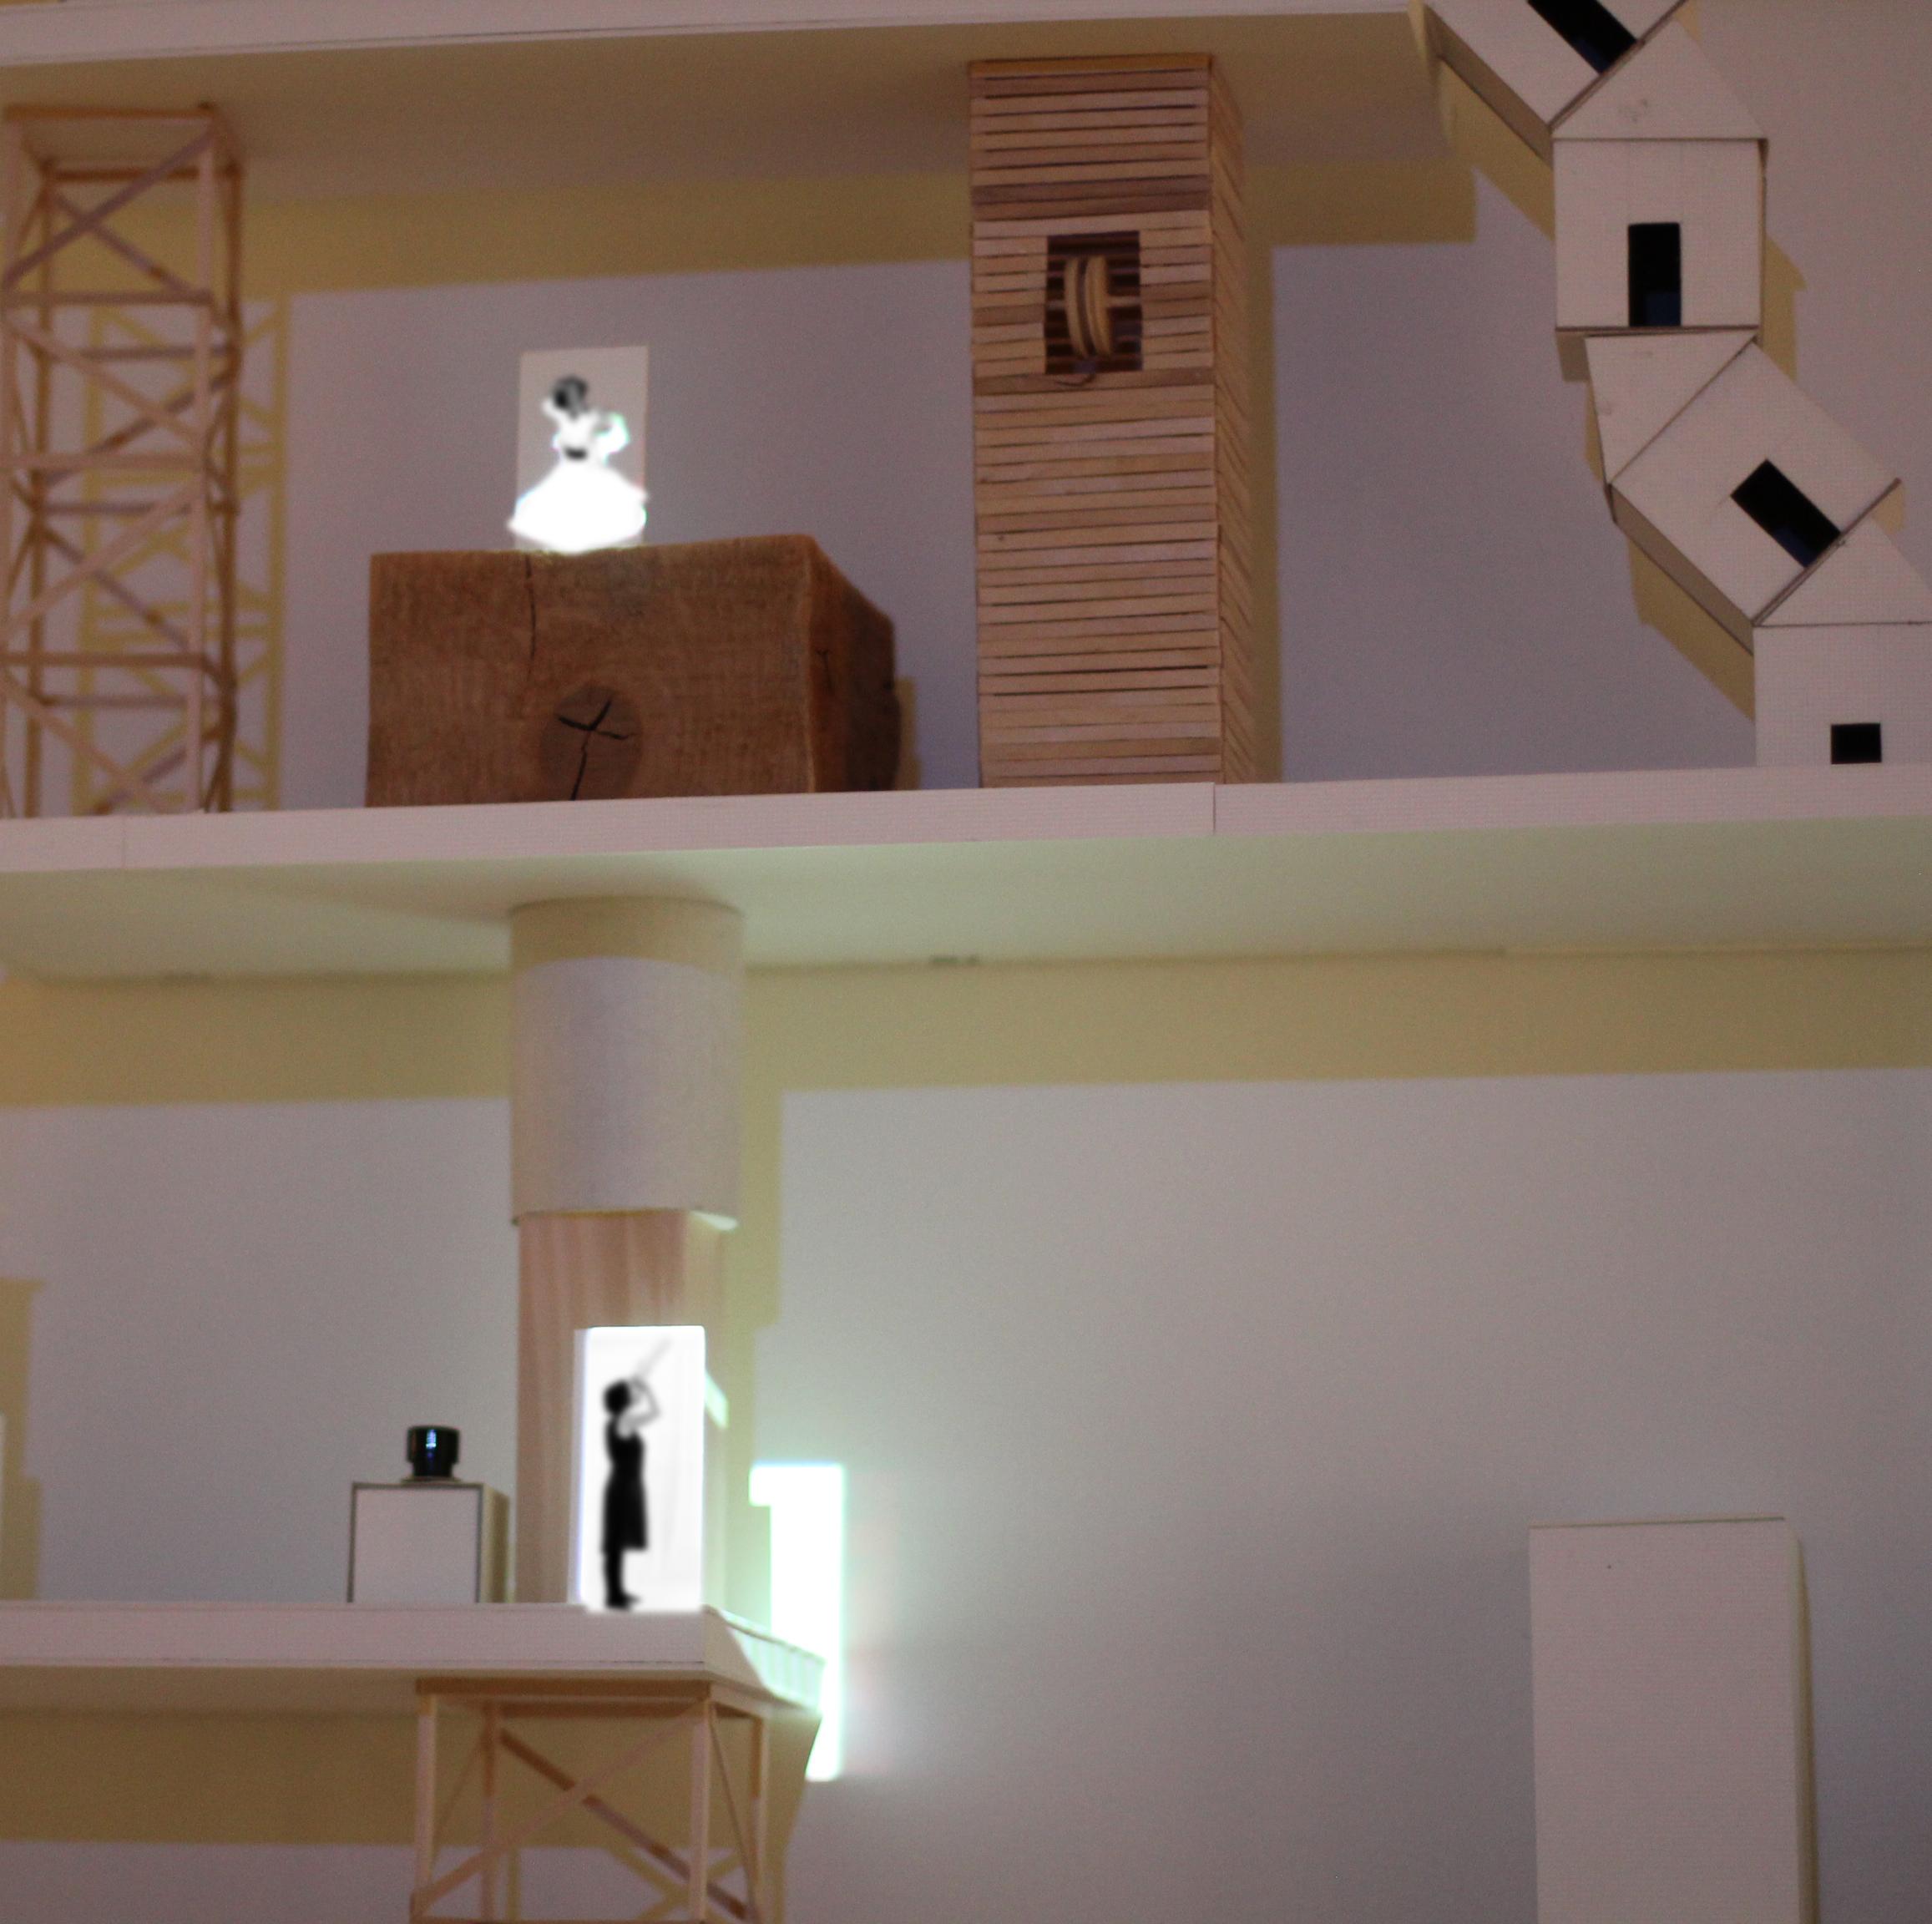 An exhibition view of an installation of different models.